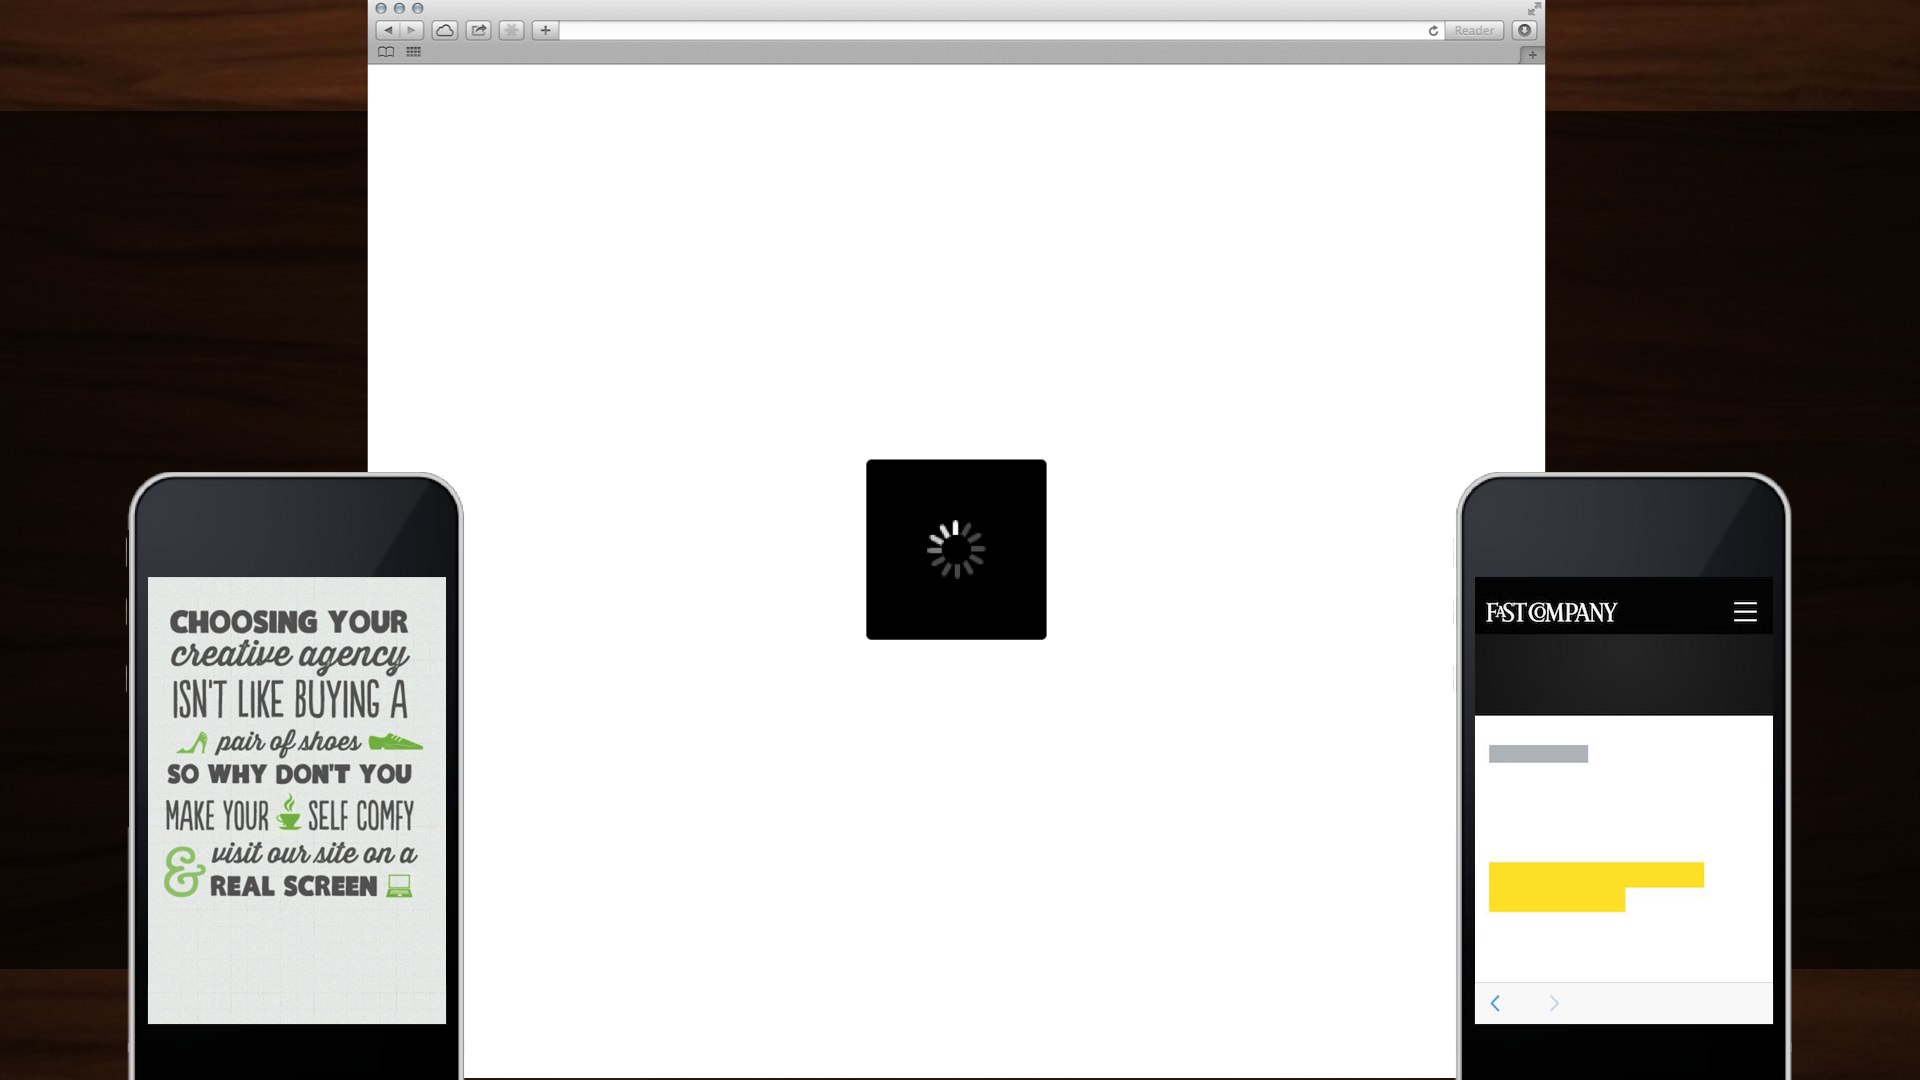 Screenshots of three browser windows, one explaining that the site should be visited on a “real screen,” one showing only a loading spinner, and one showing fastcompany.com with a layout but no visible text